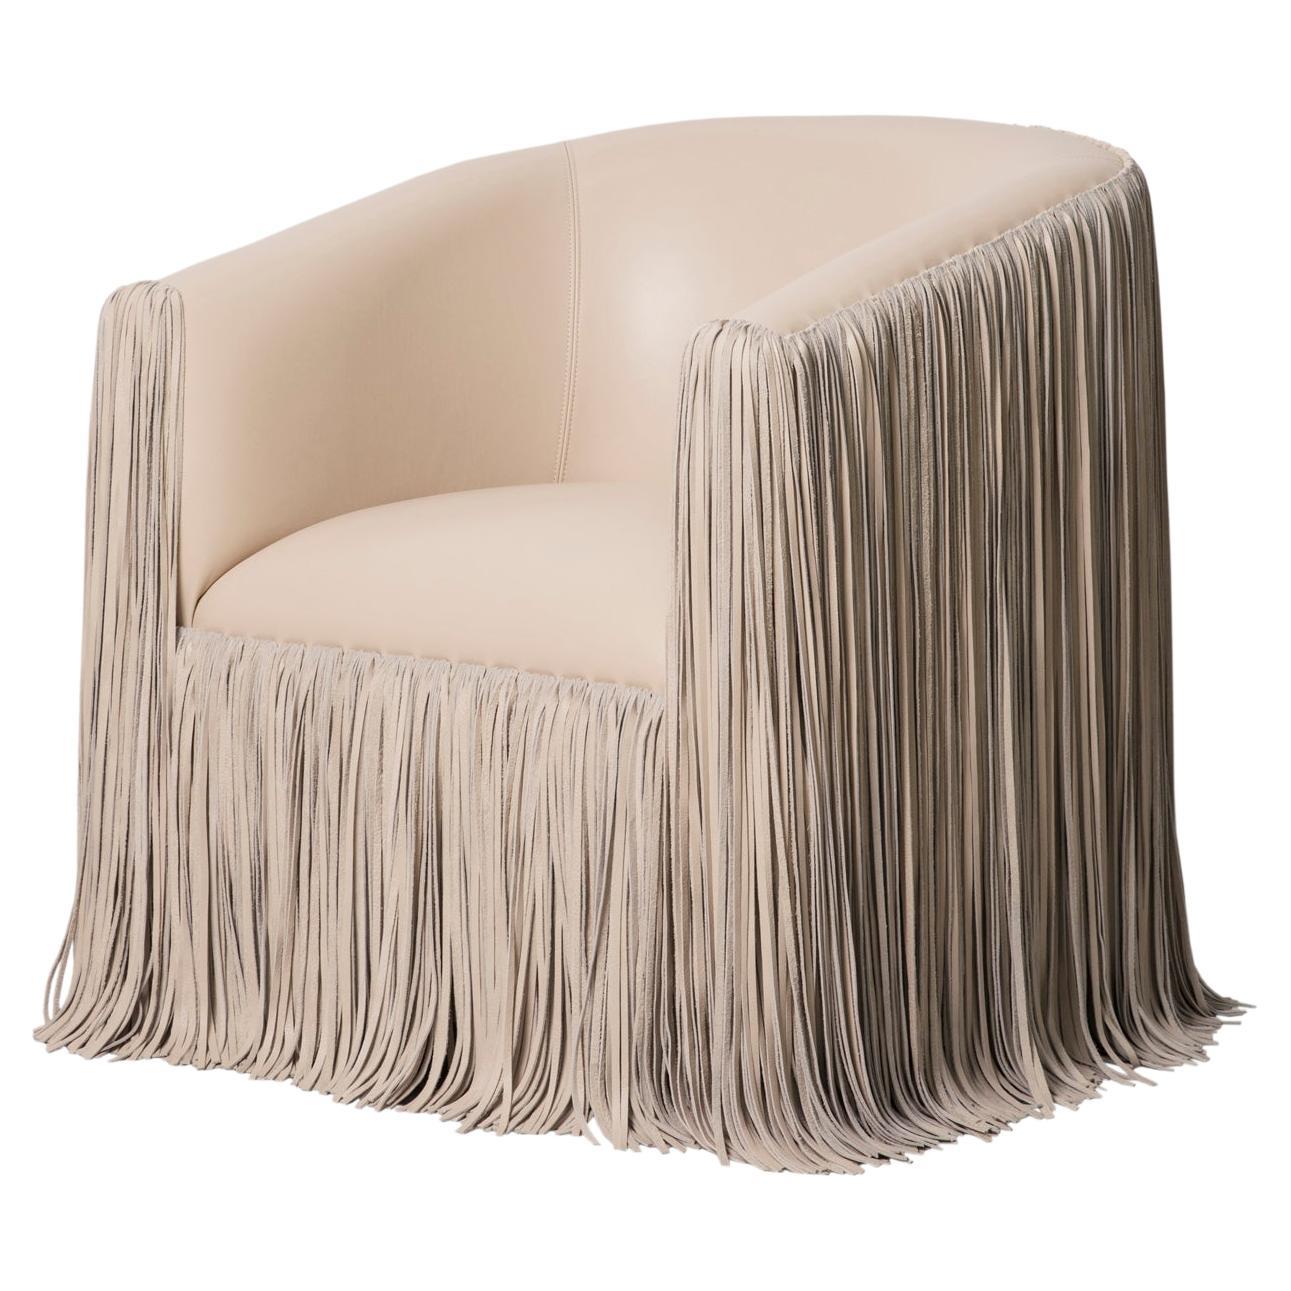 Chair - Shaggy Leather Swivel in Cream-Stone